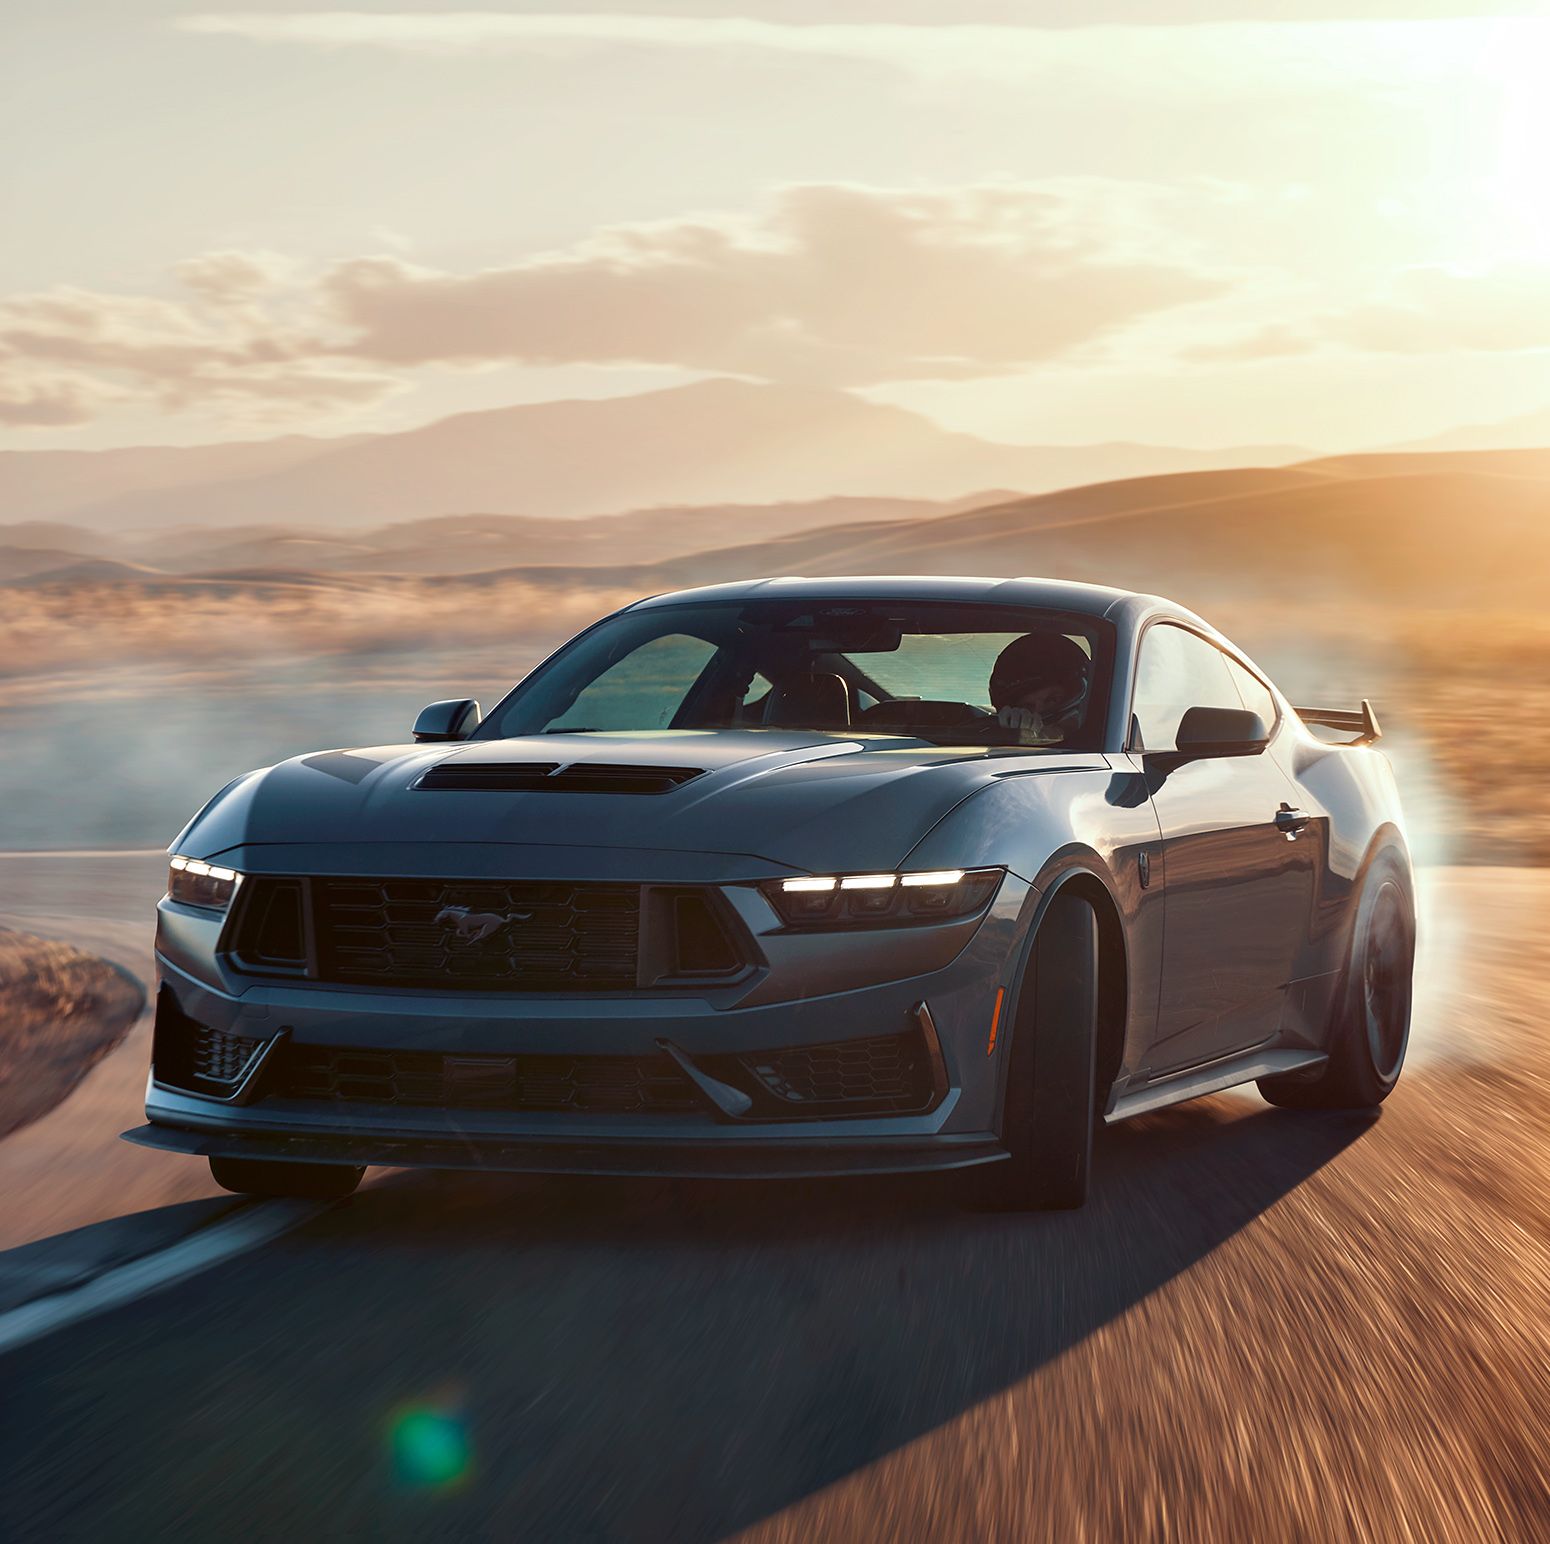 The Ford Mustang Dark Horse Is a Perfect American Track Car